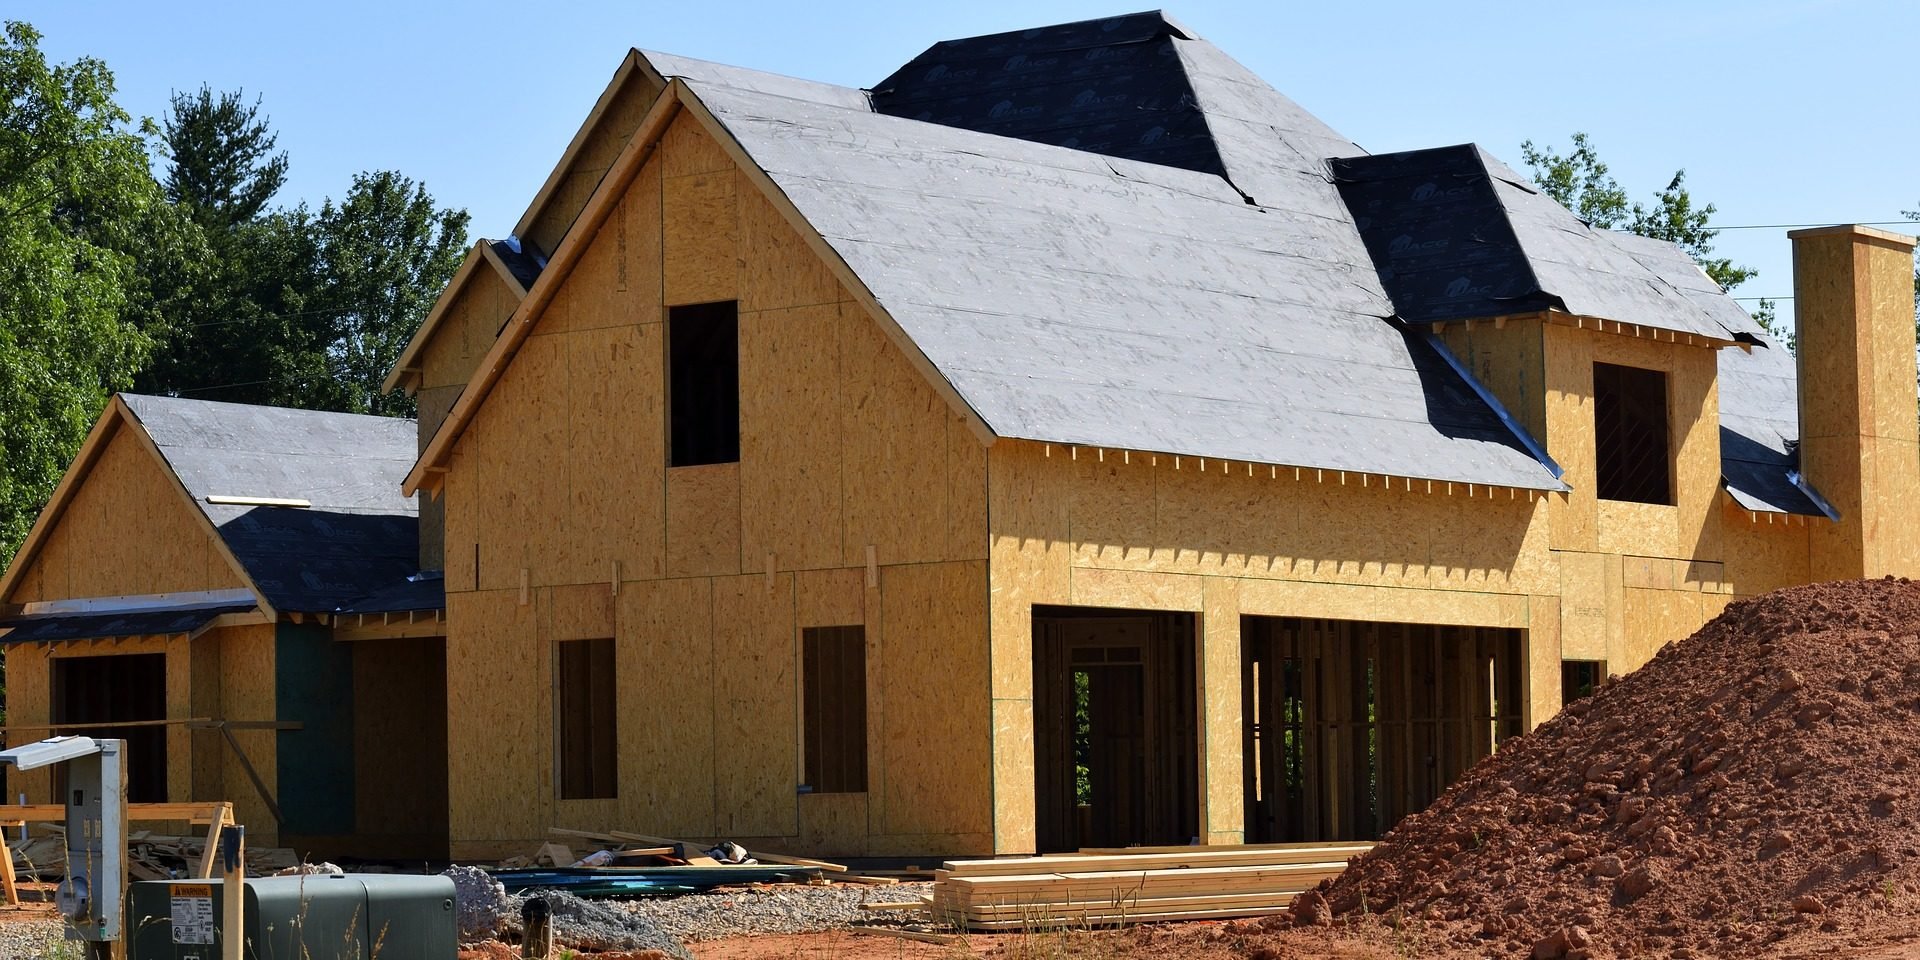 South Carolina Home Growth Means More Construction Defect Cases | Builder Warranty Issues SC | Steinberg Law Firm